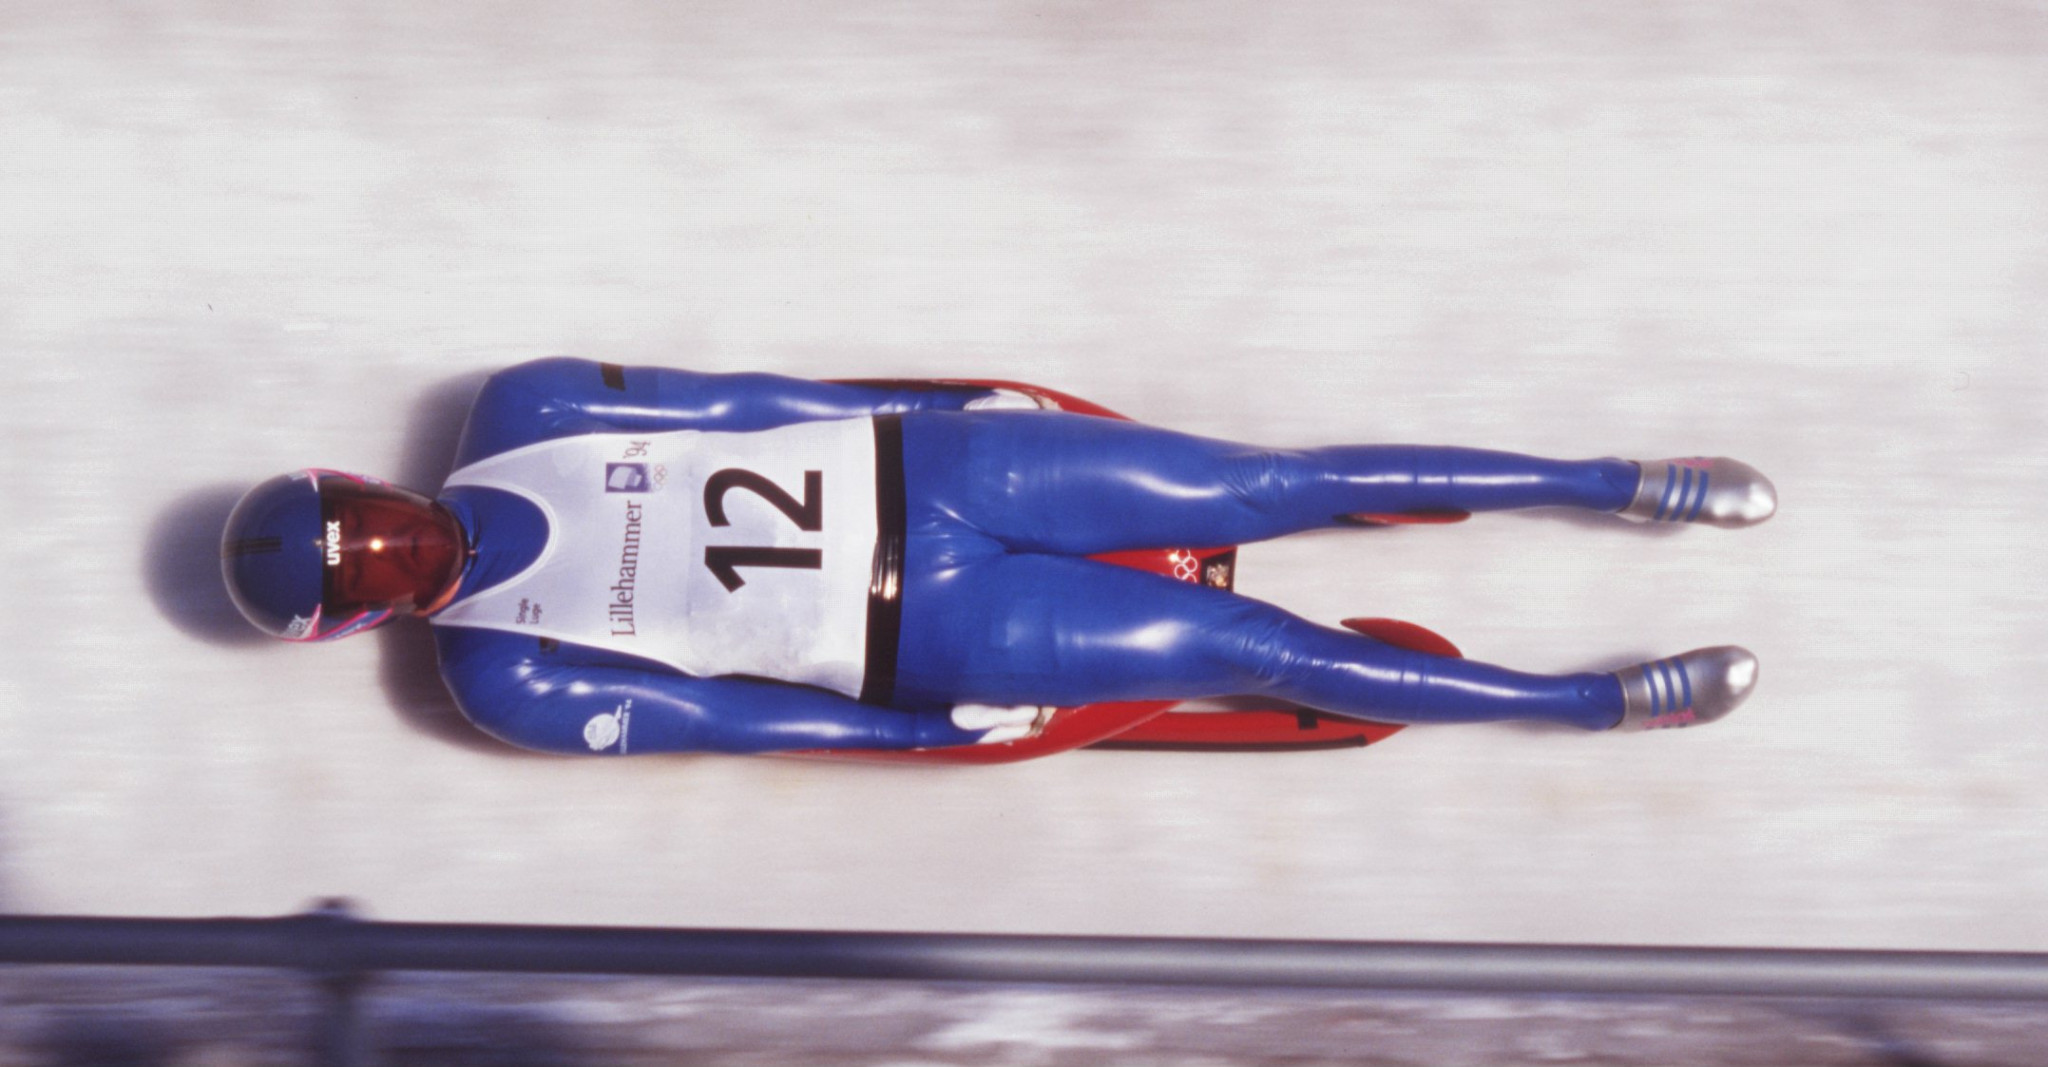 Duncan Kennedy is a three-time Winter Olympian ©Getty Images